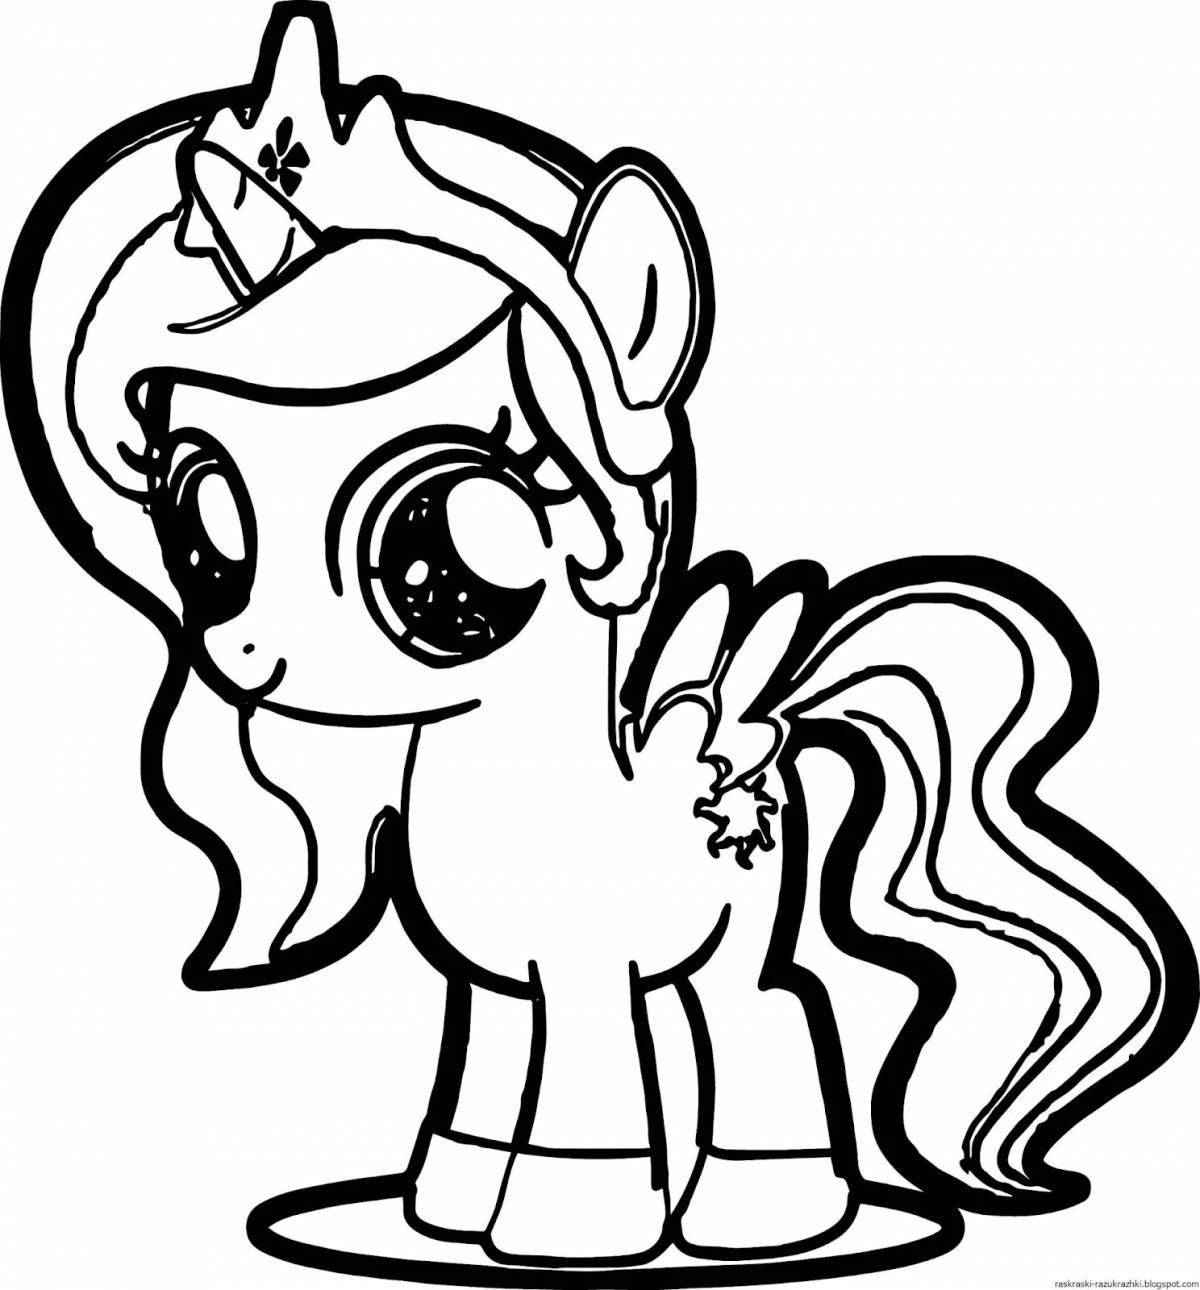 Brilliant pony drawing coloring book